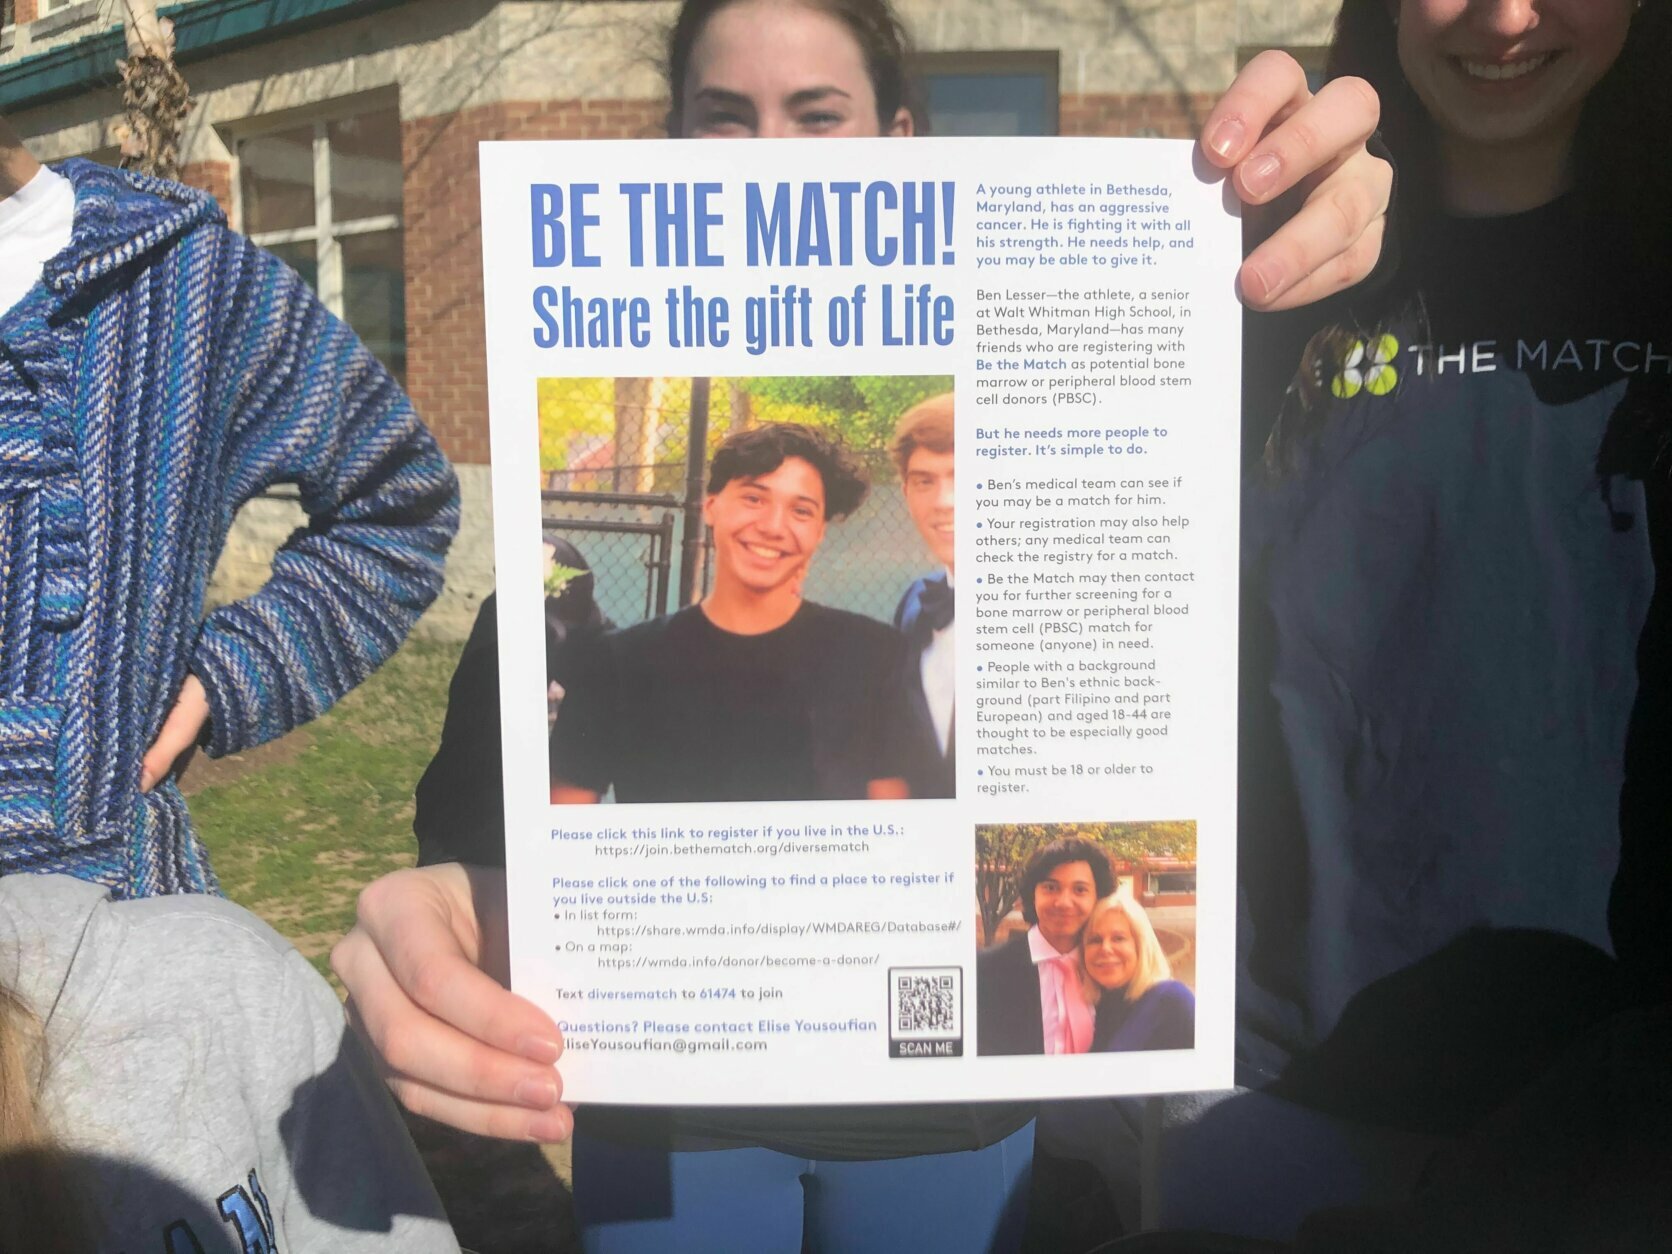 Ben Lesser needs someone who matches his genetic background, part Philipino, part European, to be a bone marrow doner. (WTOP/Melissa Howell)